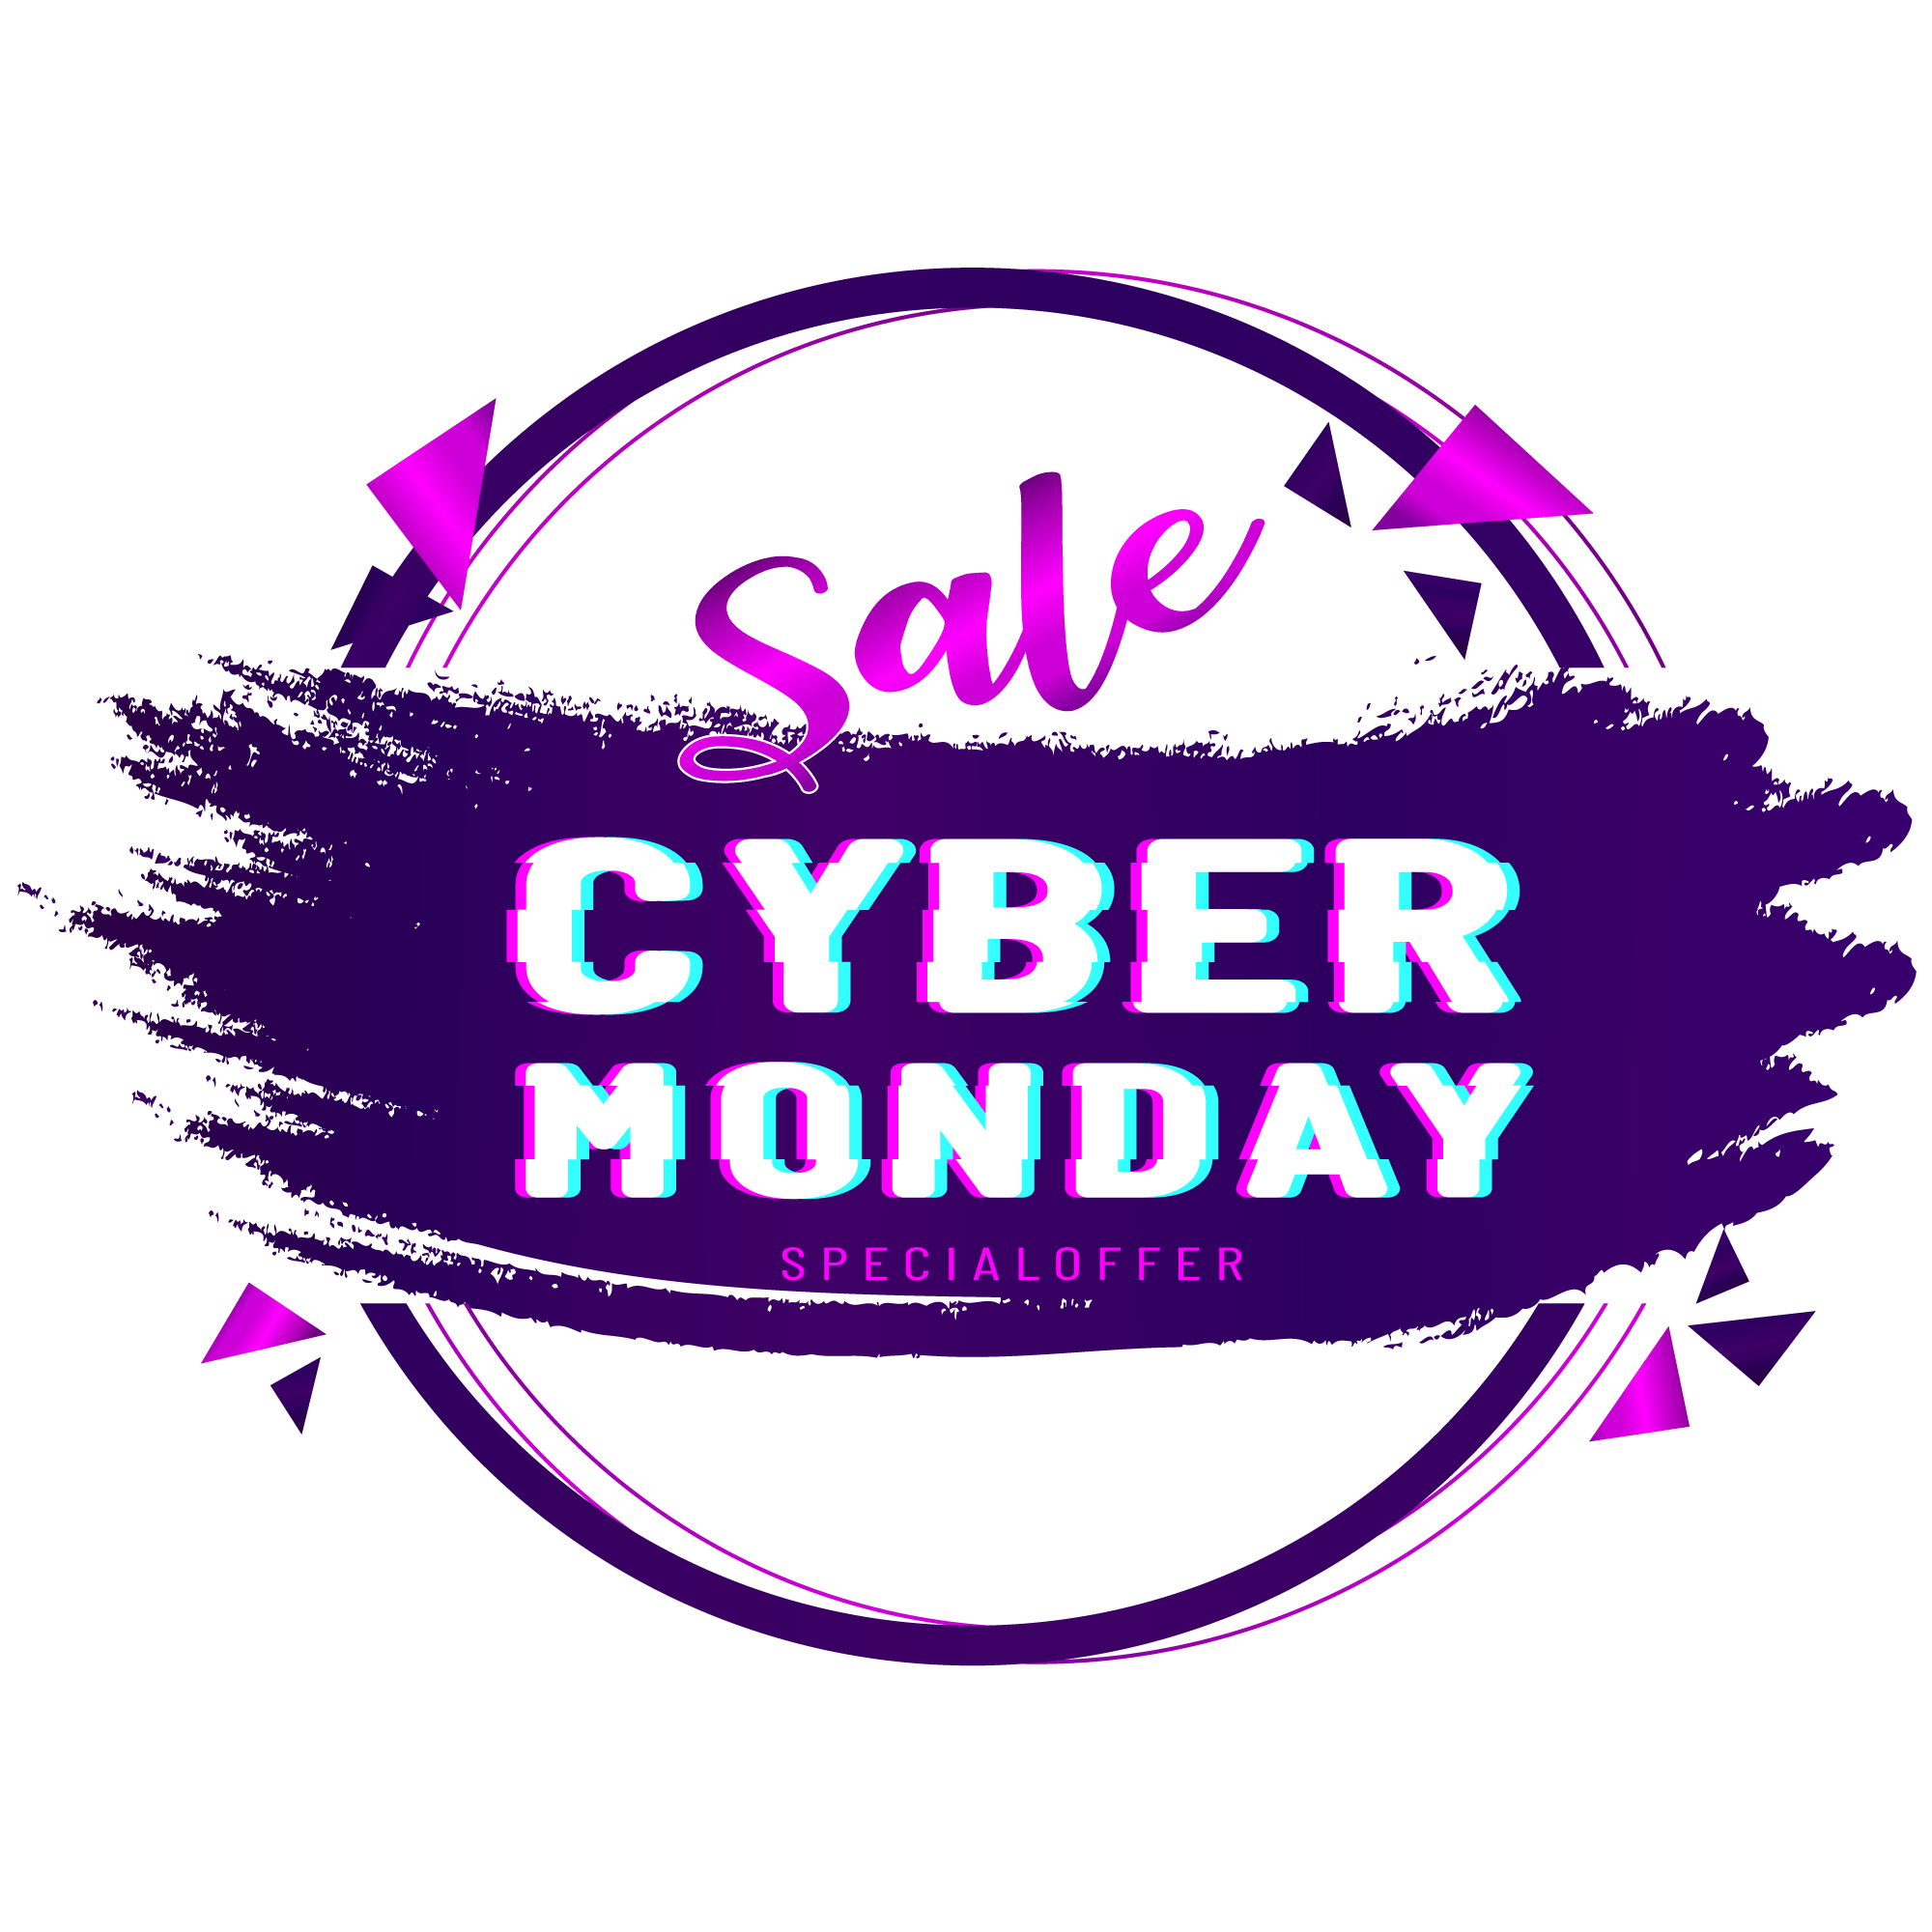 Cyber monday offer